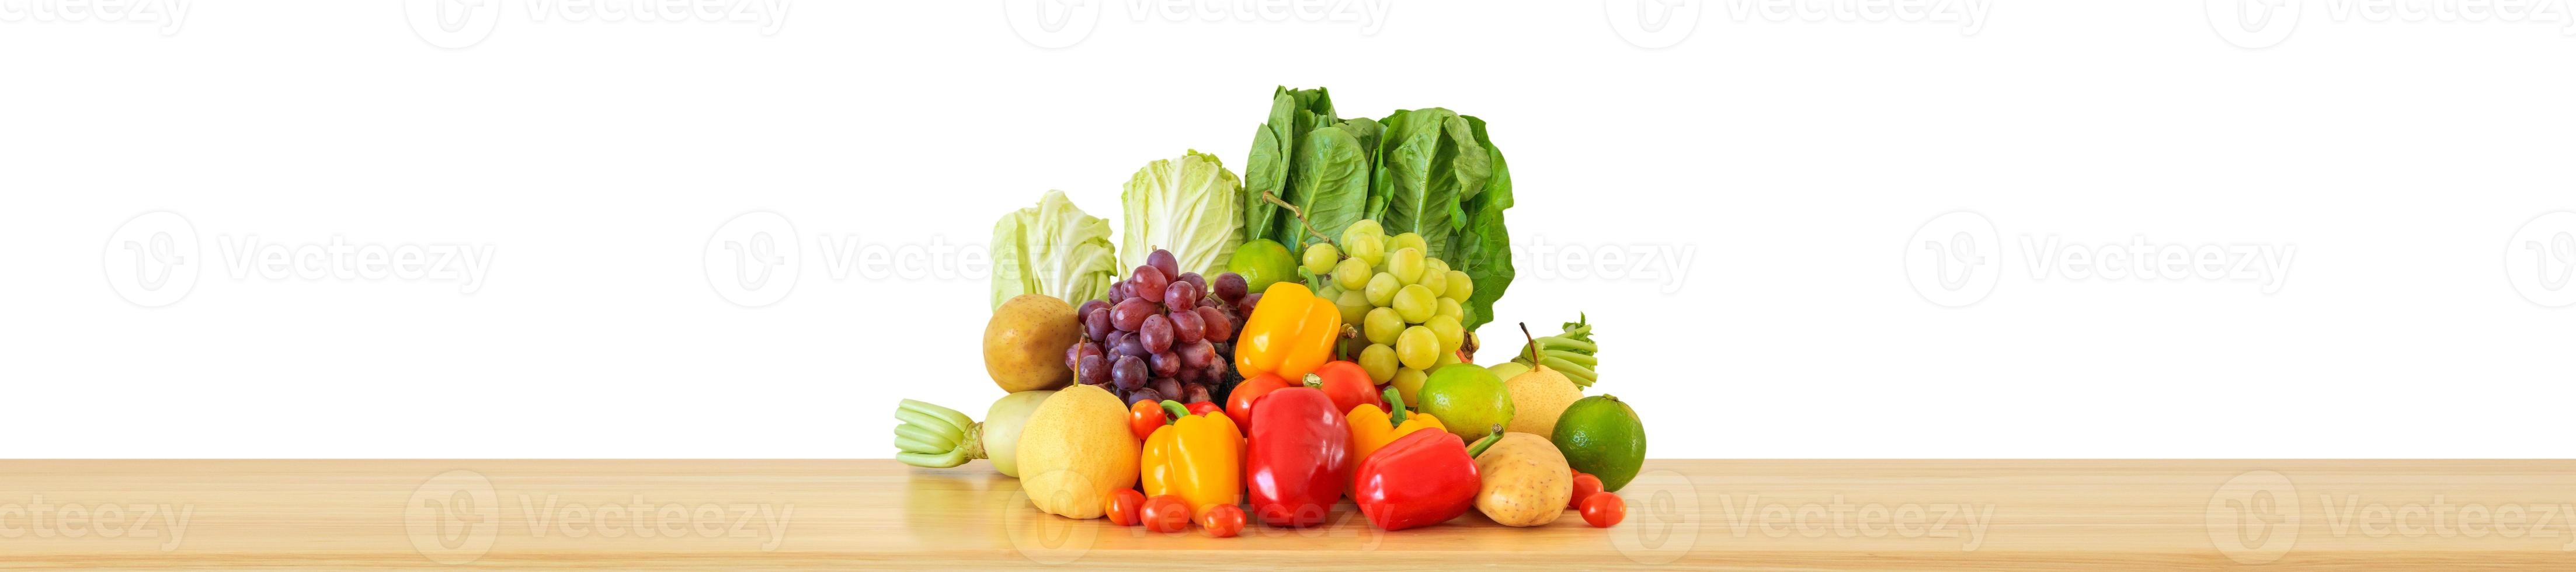 Fresh fruits and vegetables grocery product on wood table isolated on white background photo